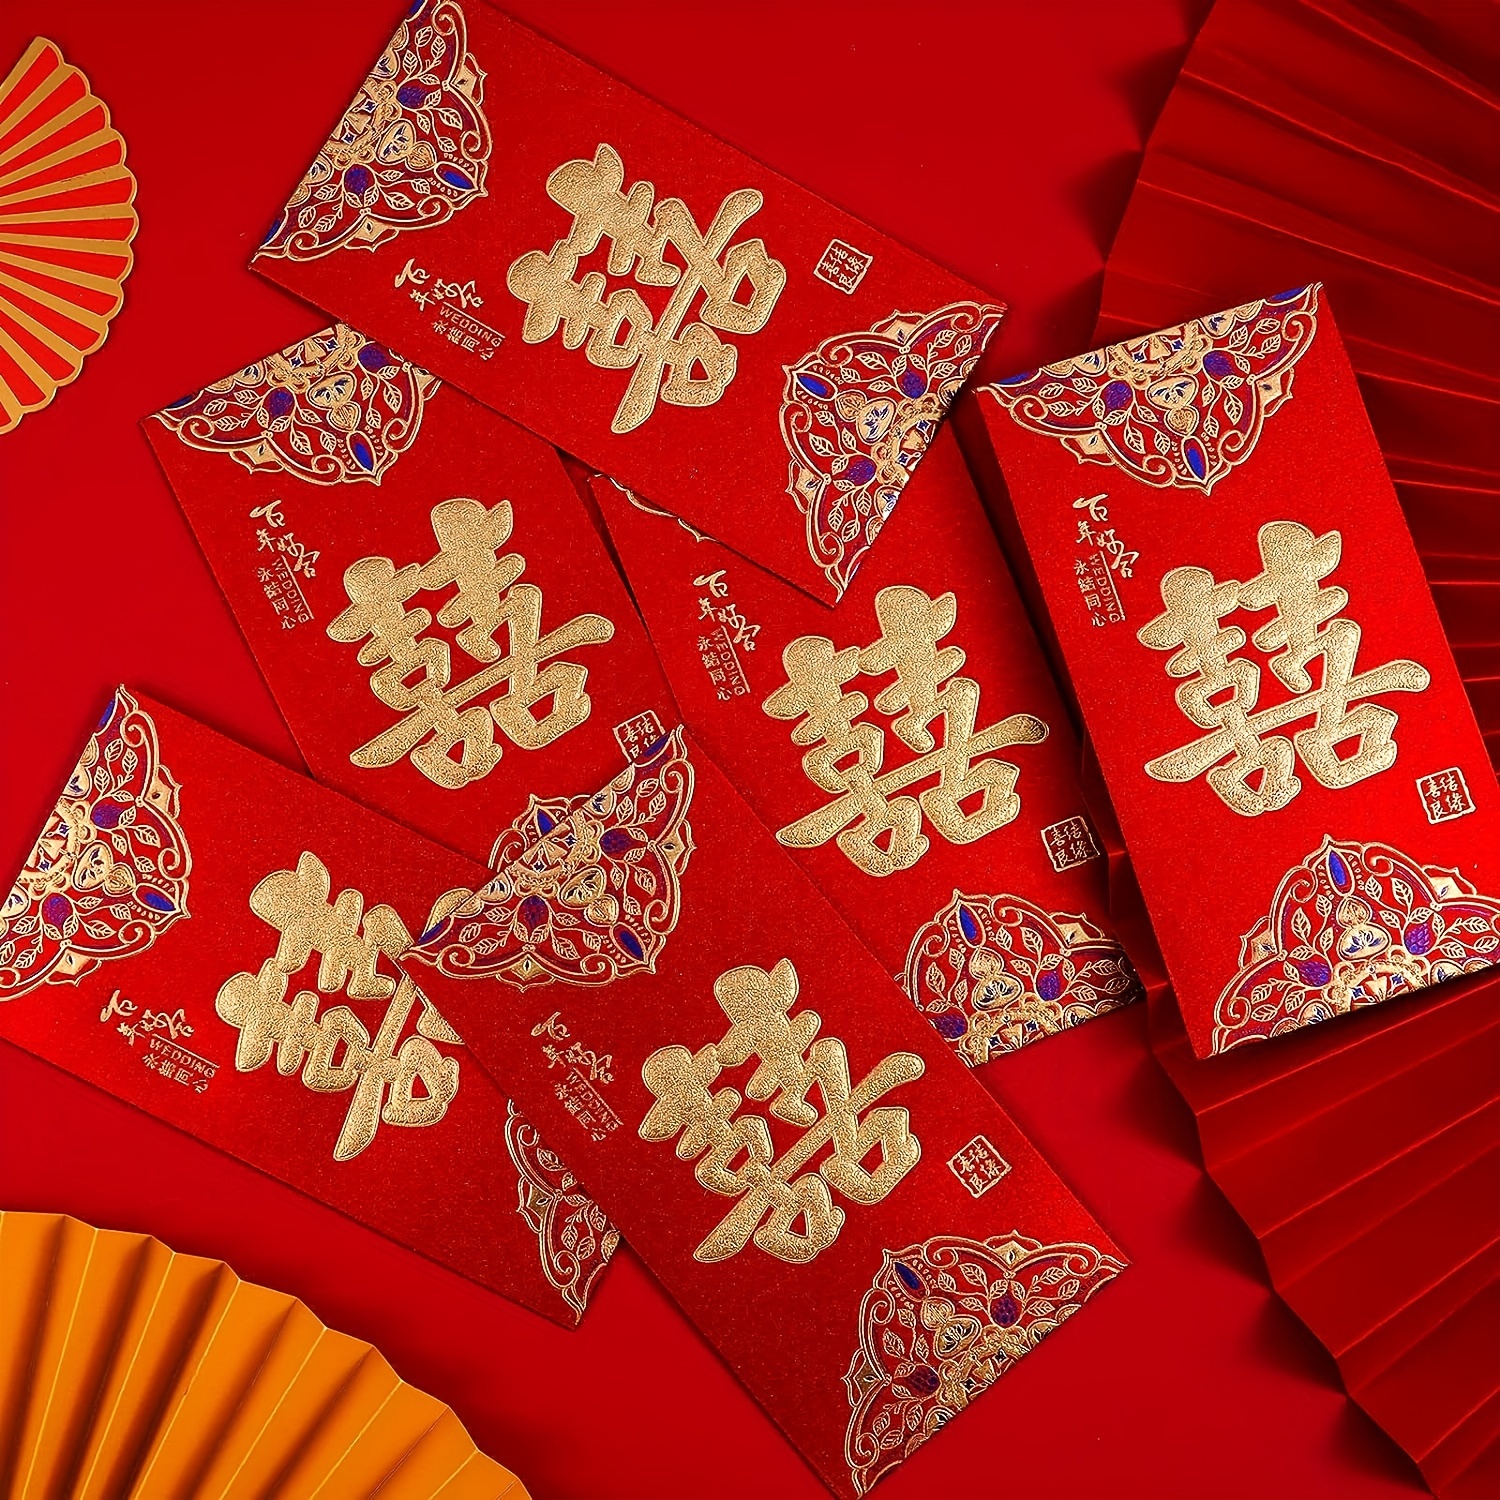 LUCKY MONEY Red Gold Envelope Chinese Lunar New Year Gift Currency - Pack  of 25